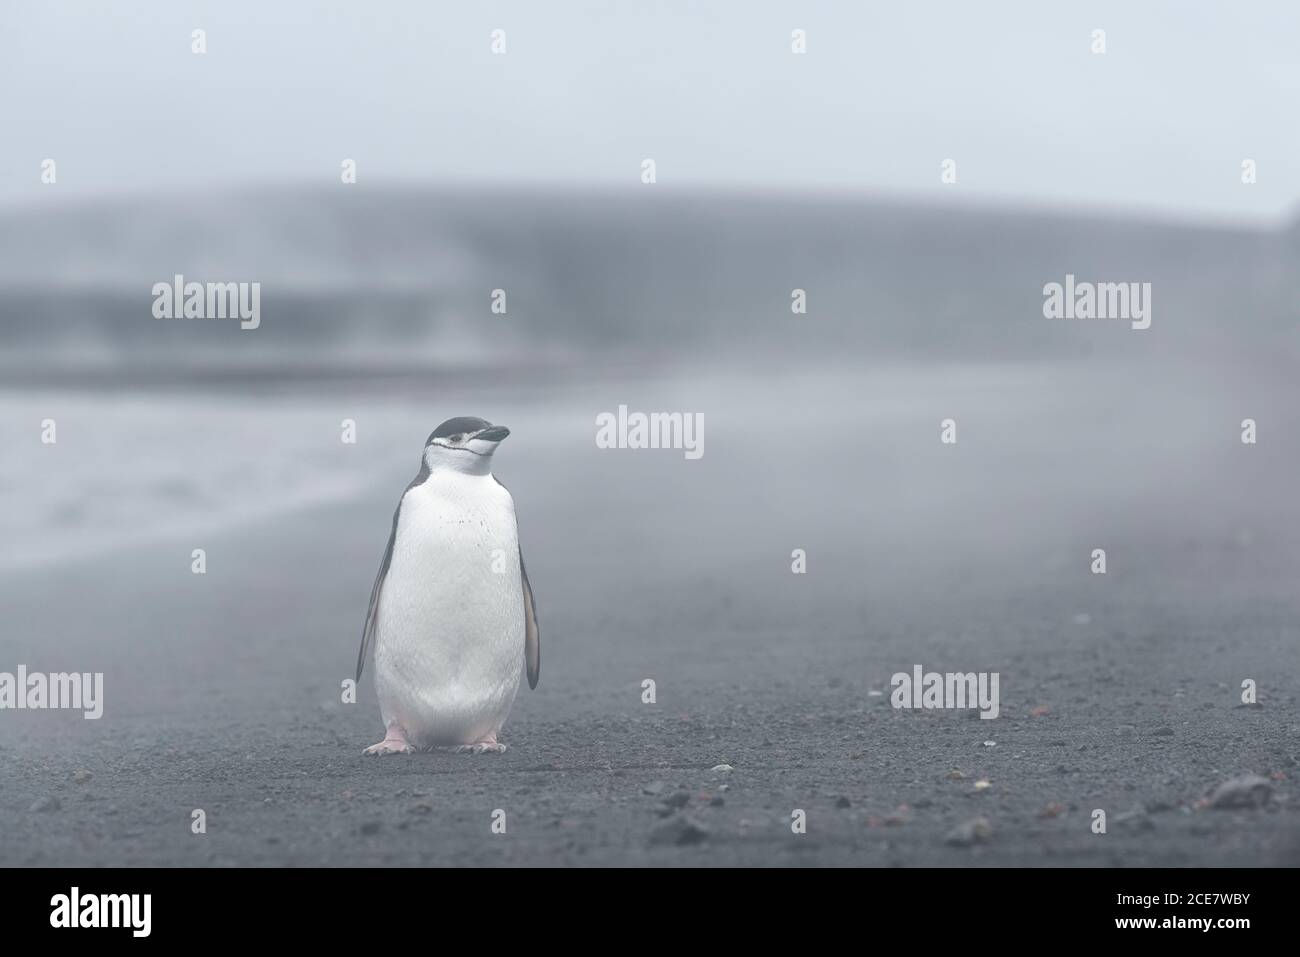 Chinstrap penguin (Pygoscelis antarctica) standing in the steam from hot springs on the beach, Whalers Bay, Deception Island, South Shetland Islands, Stock Photo